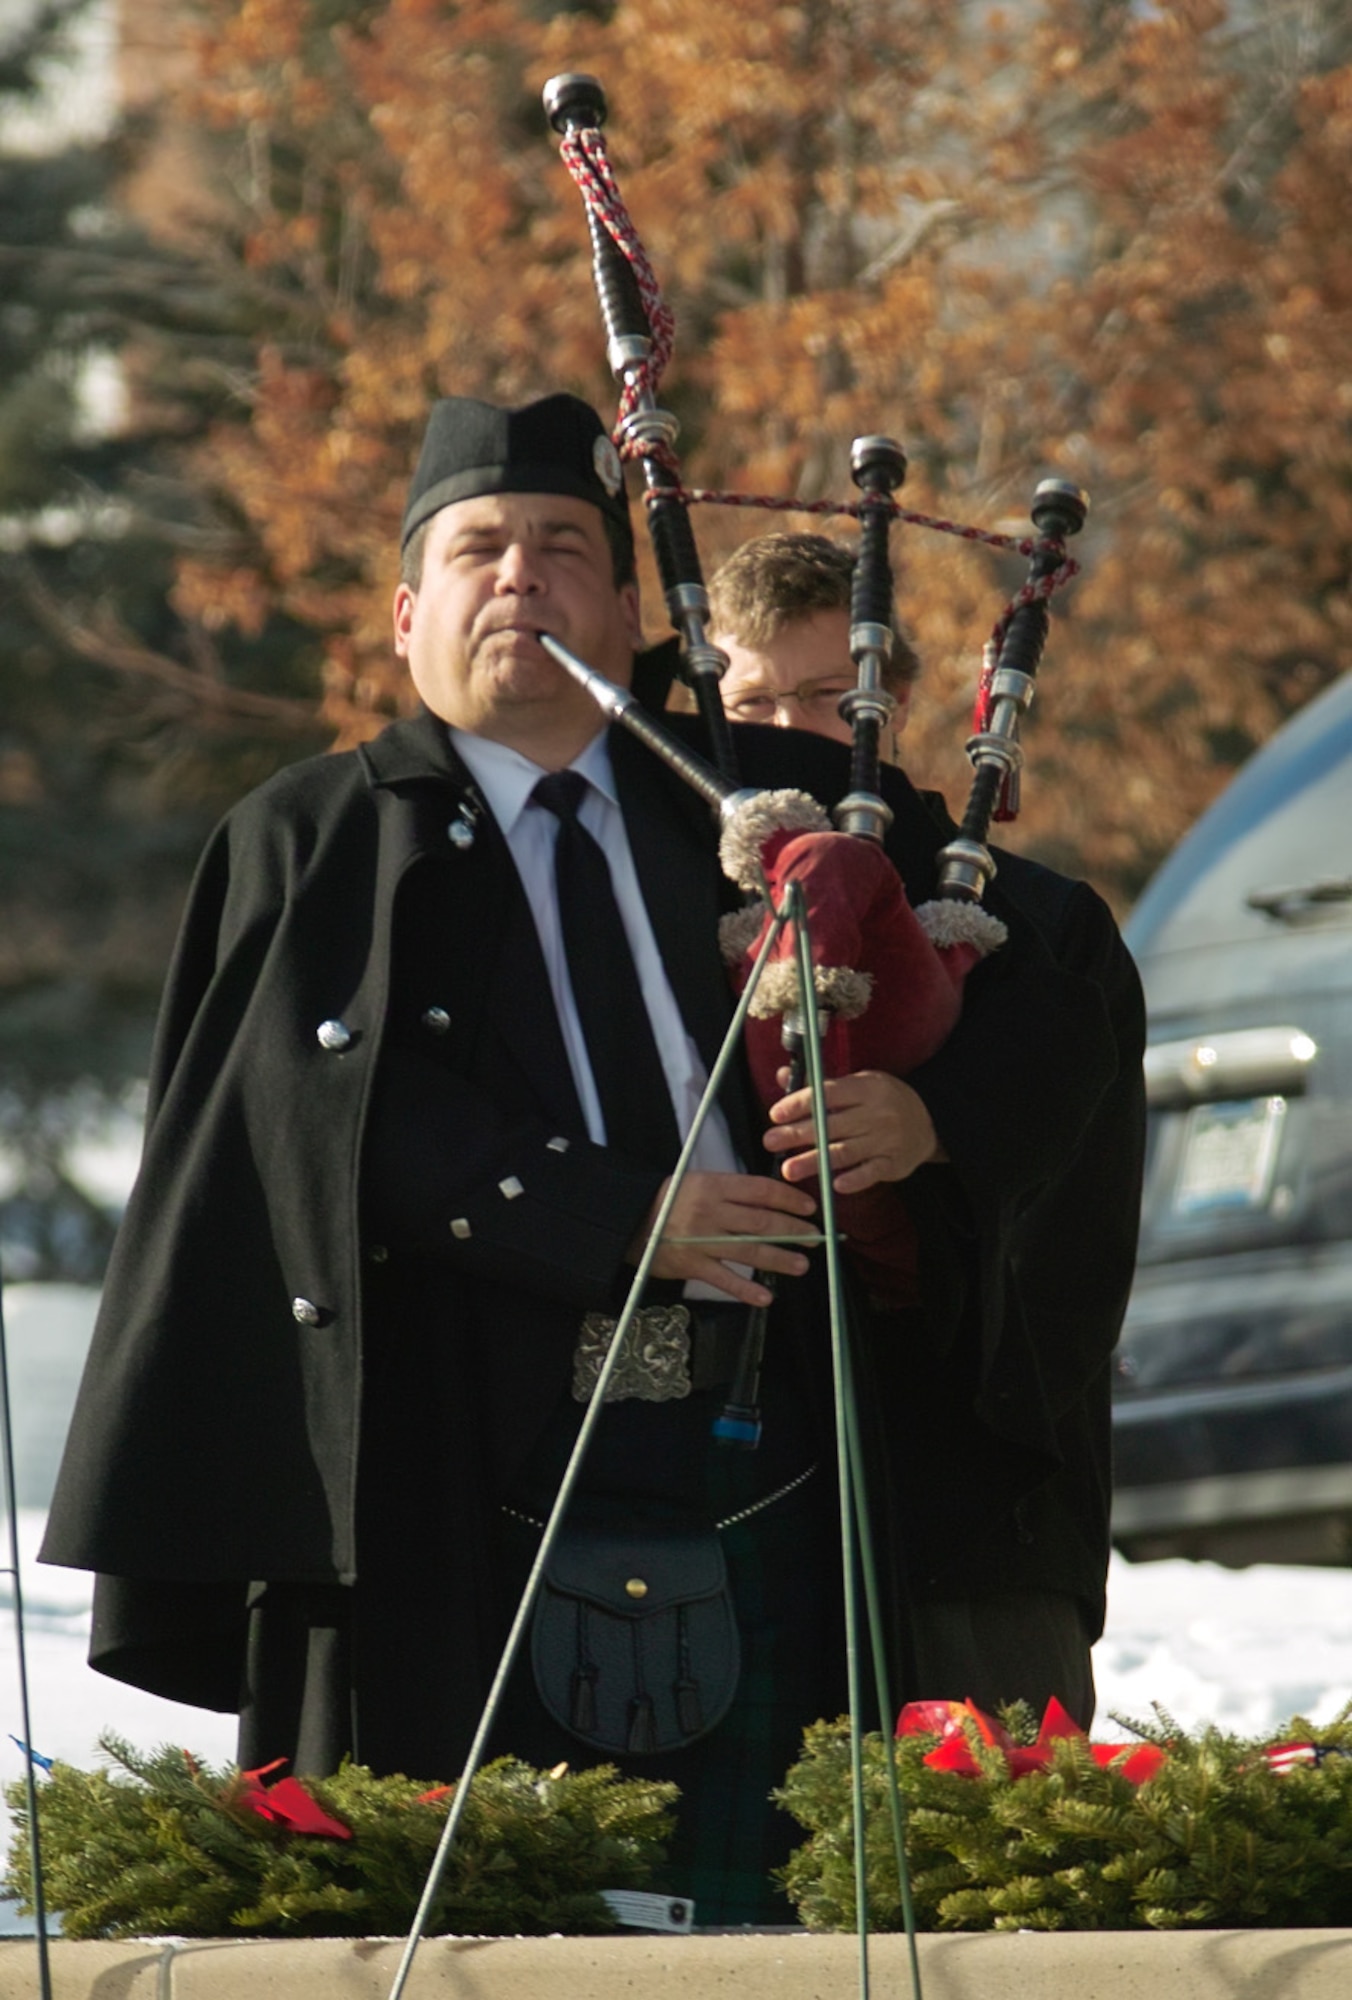 A bagpiper from the Scottish American Military Society plays for the fallen during the ceremony Dec. 12. SAMS members braved the 35-degree temperatures in traditional Scottish garb, including kilt, to honor veterans. (U.S. Air Force photo by Master Sgt. Steven Clark)